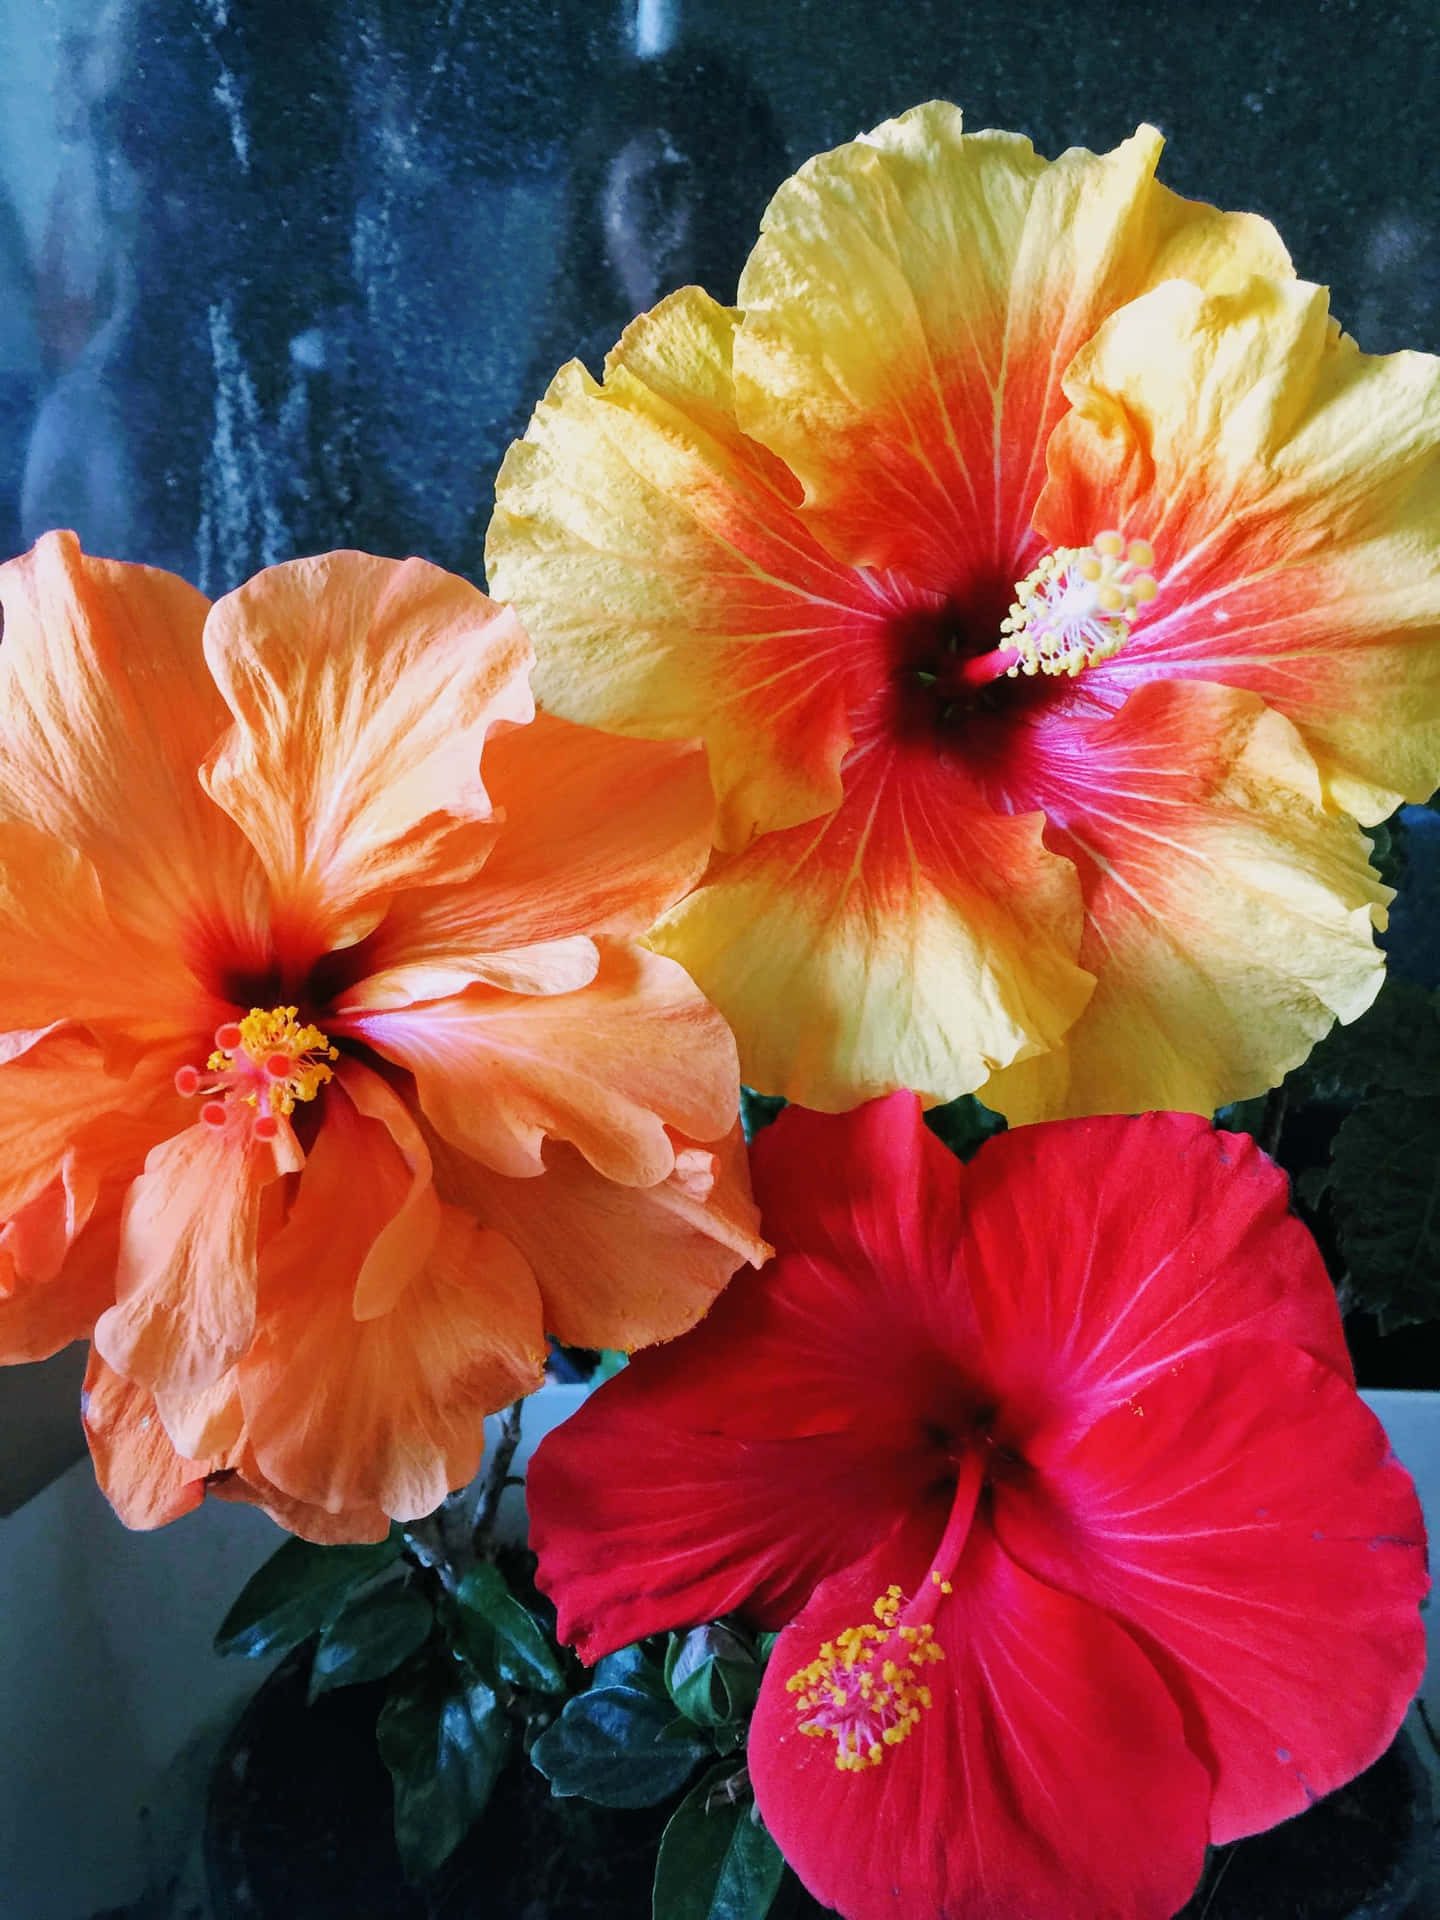 Cool Hibiscus Flower With Huge Petals Background